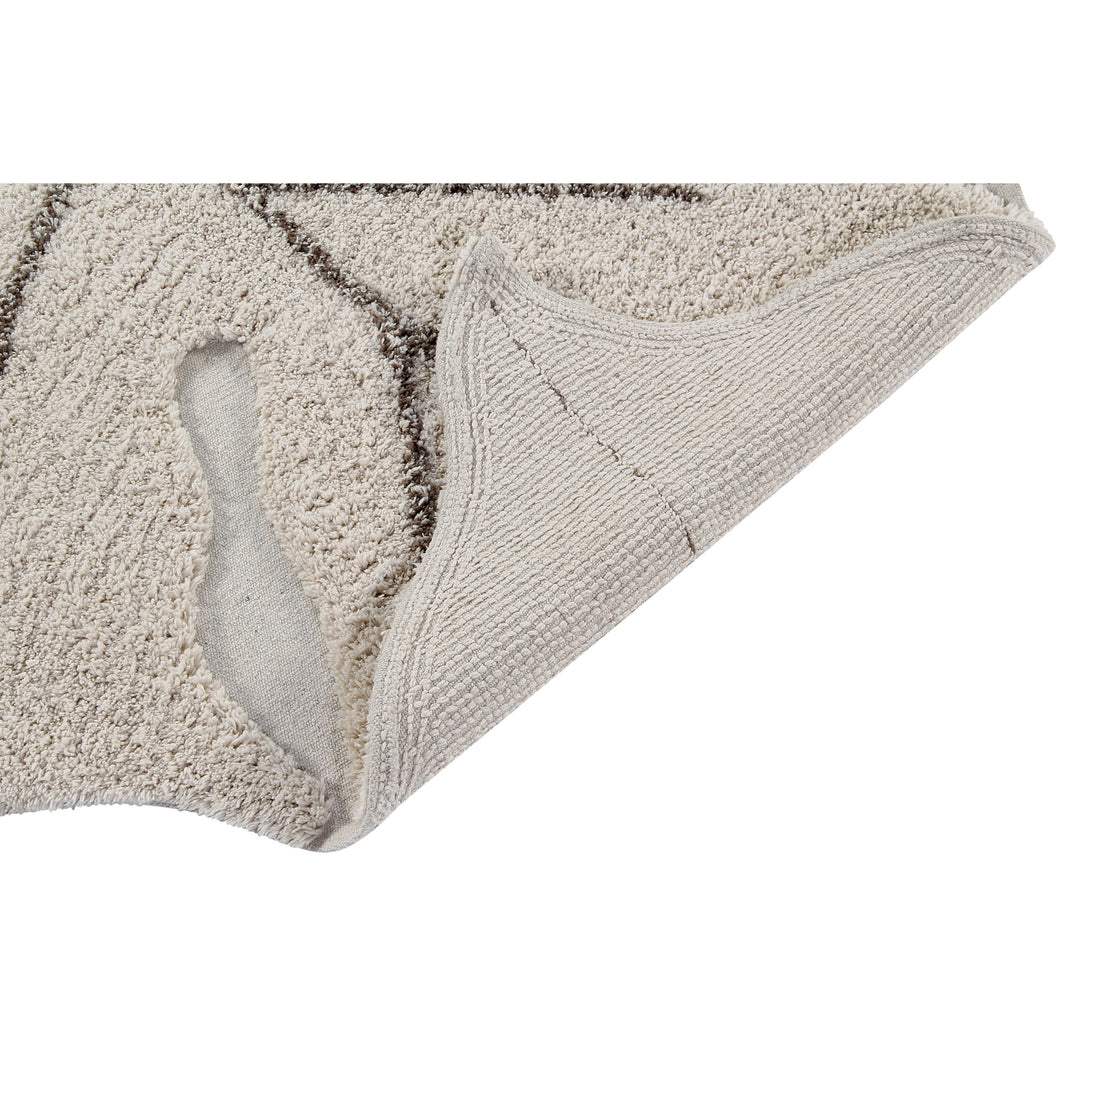 lorena-canals-re-edition-monstera-natural-machine-washable-rug- (3)